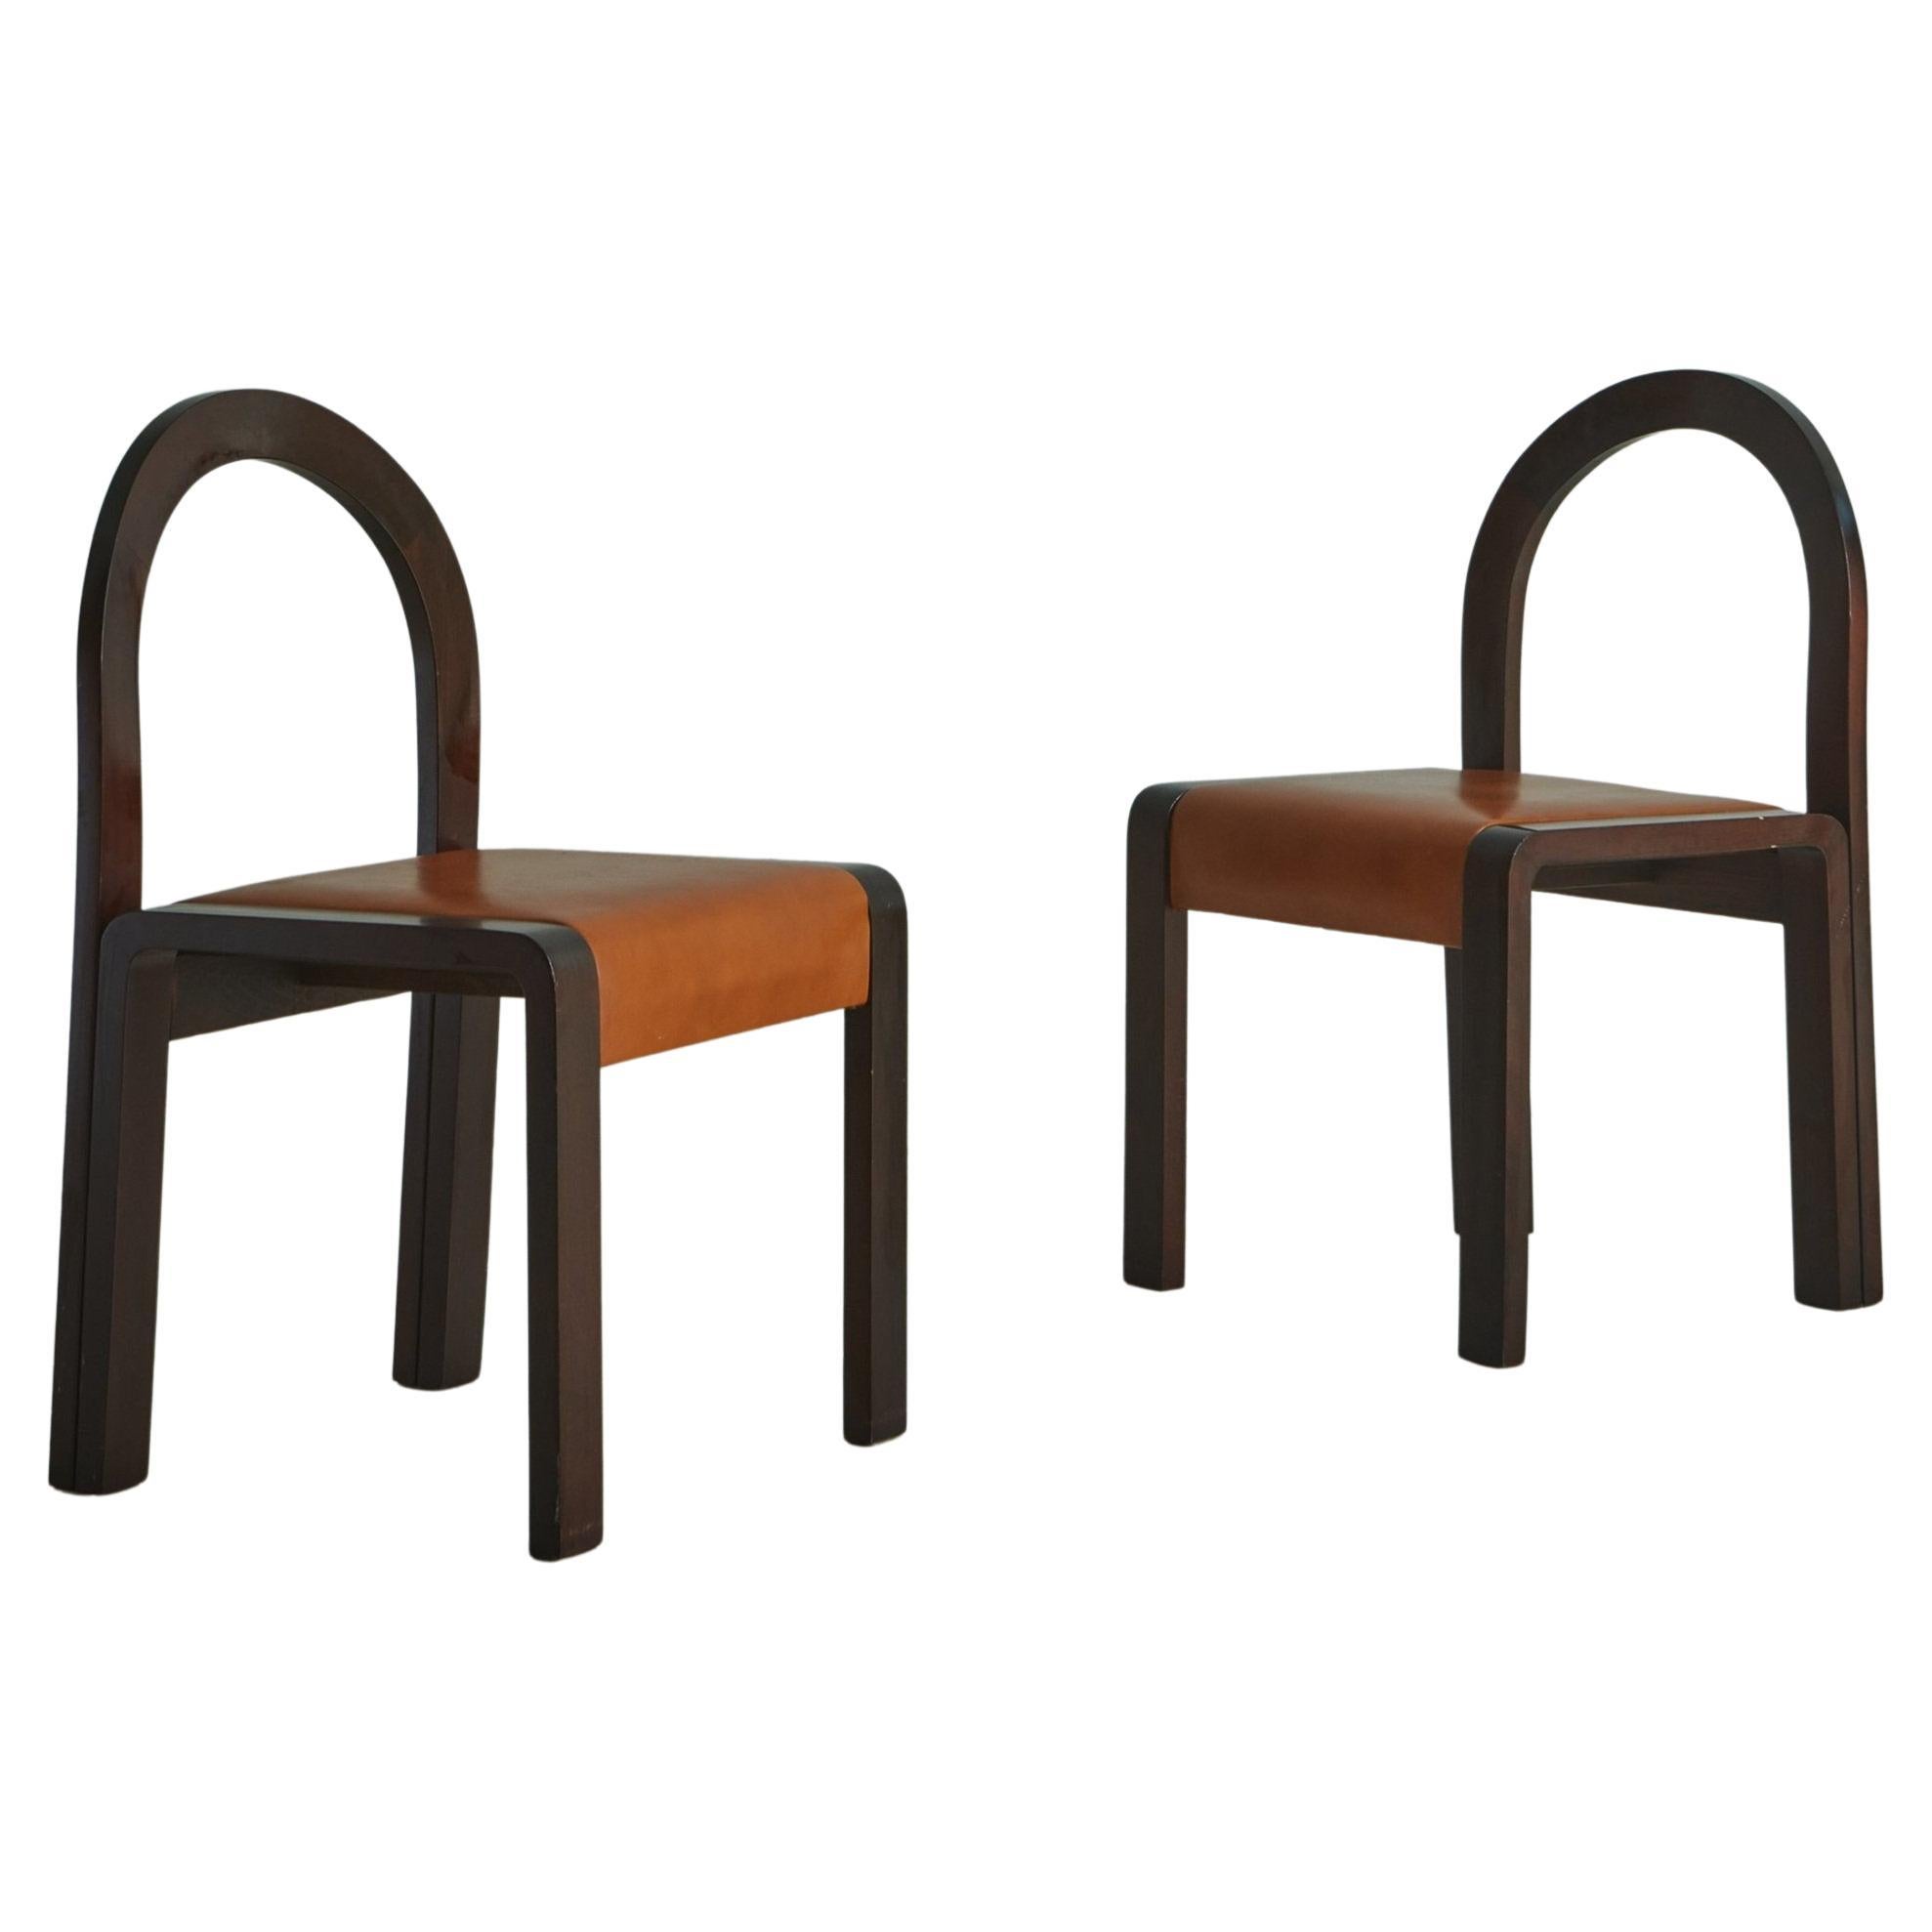 How old are bentwood rockers?